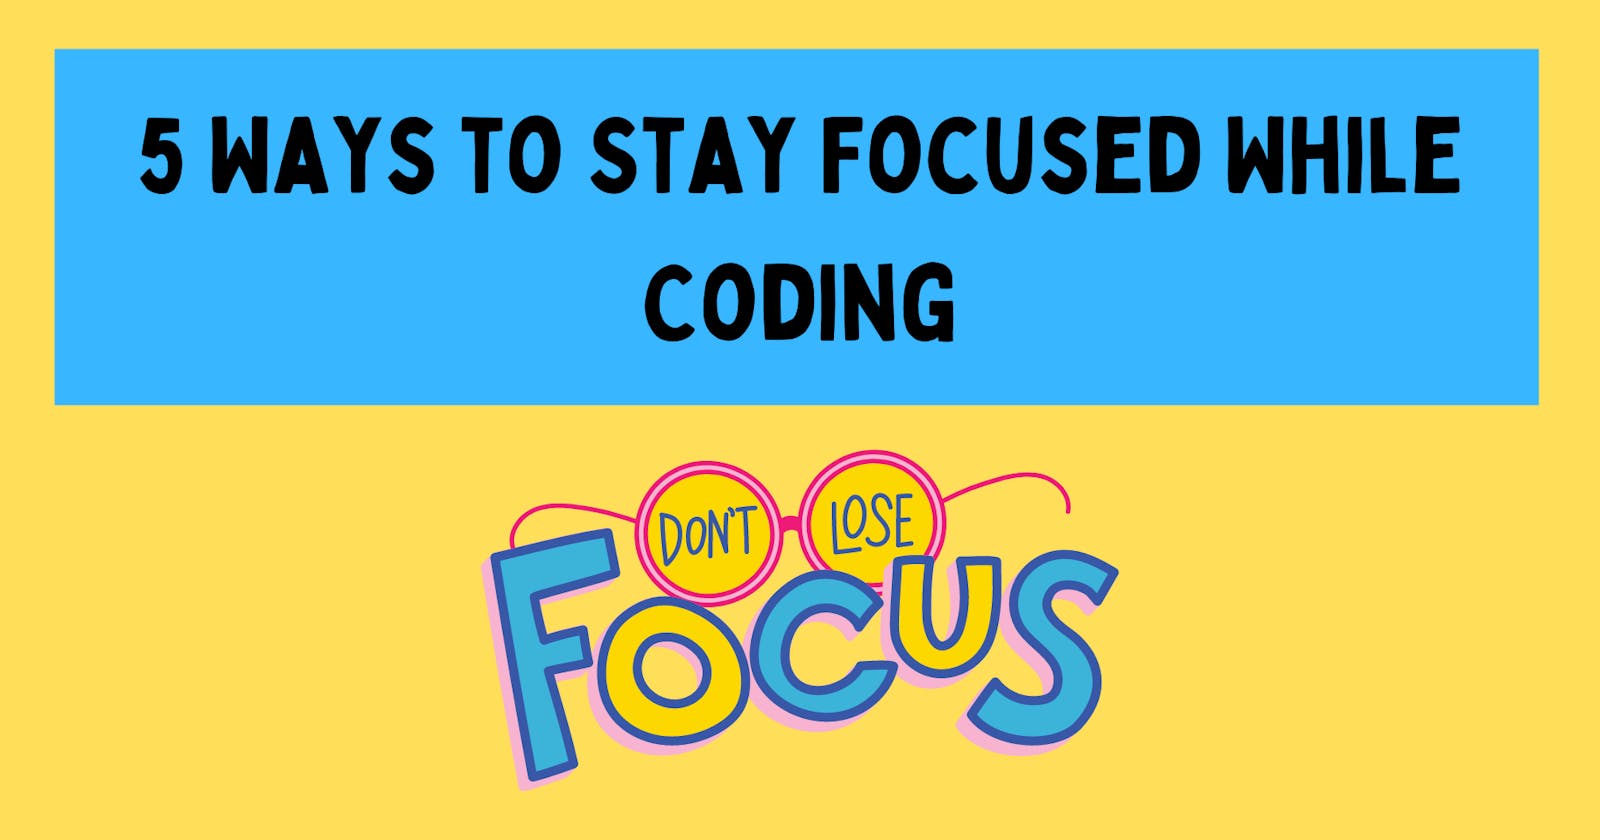 5 Ways to Stay Focused While Coding